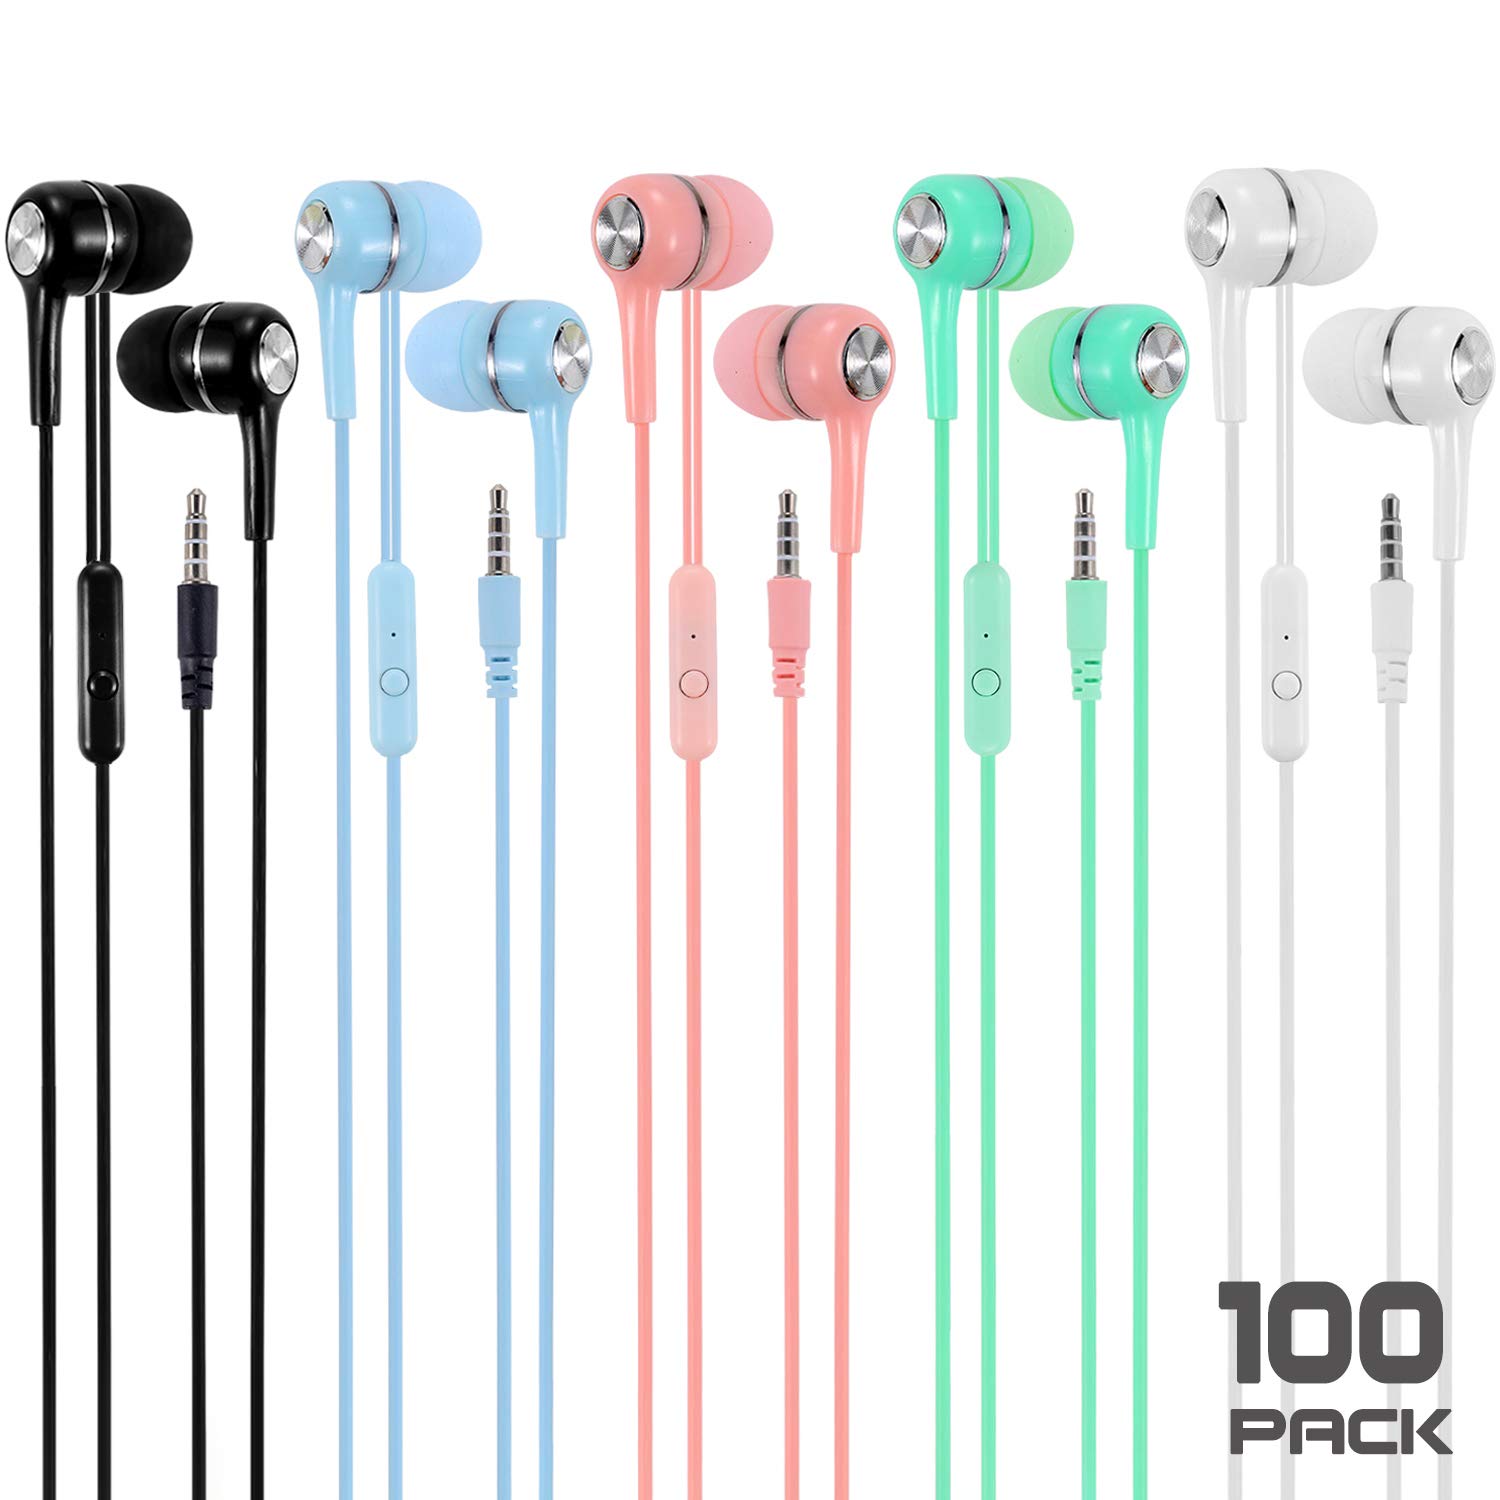 Wholesale Bulk Earbuds Headphones with Microphone 100 Packs Multi Colored, Durable Earphones with Mic for School Classroom Students Kids Children